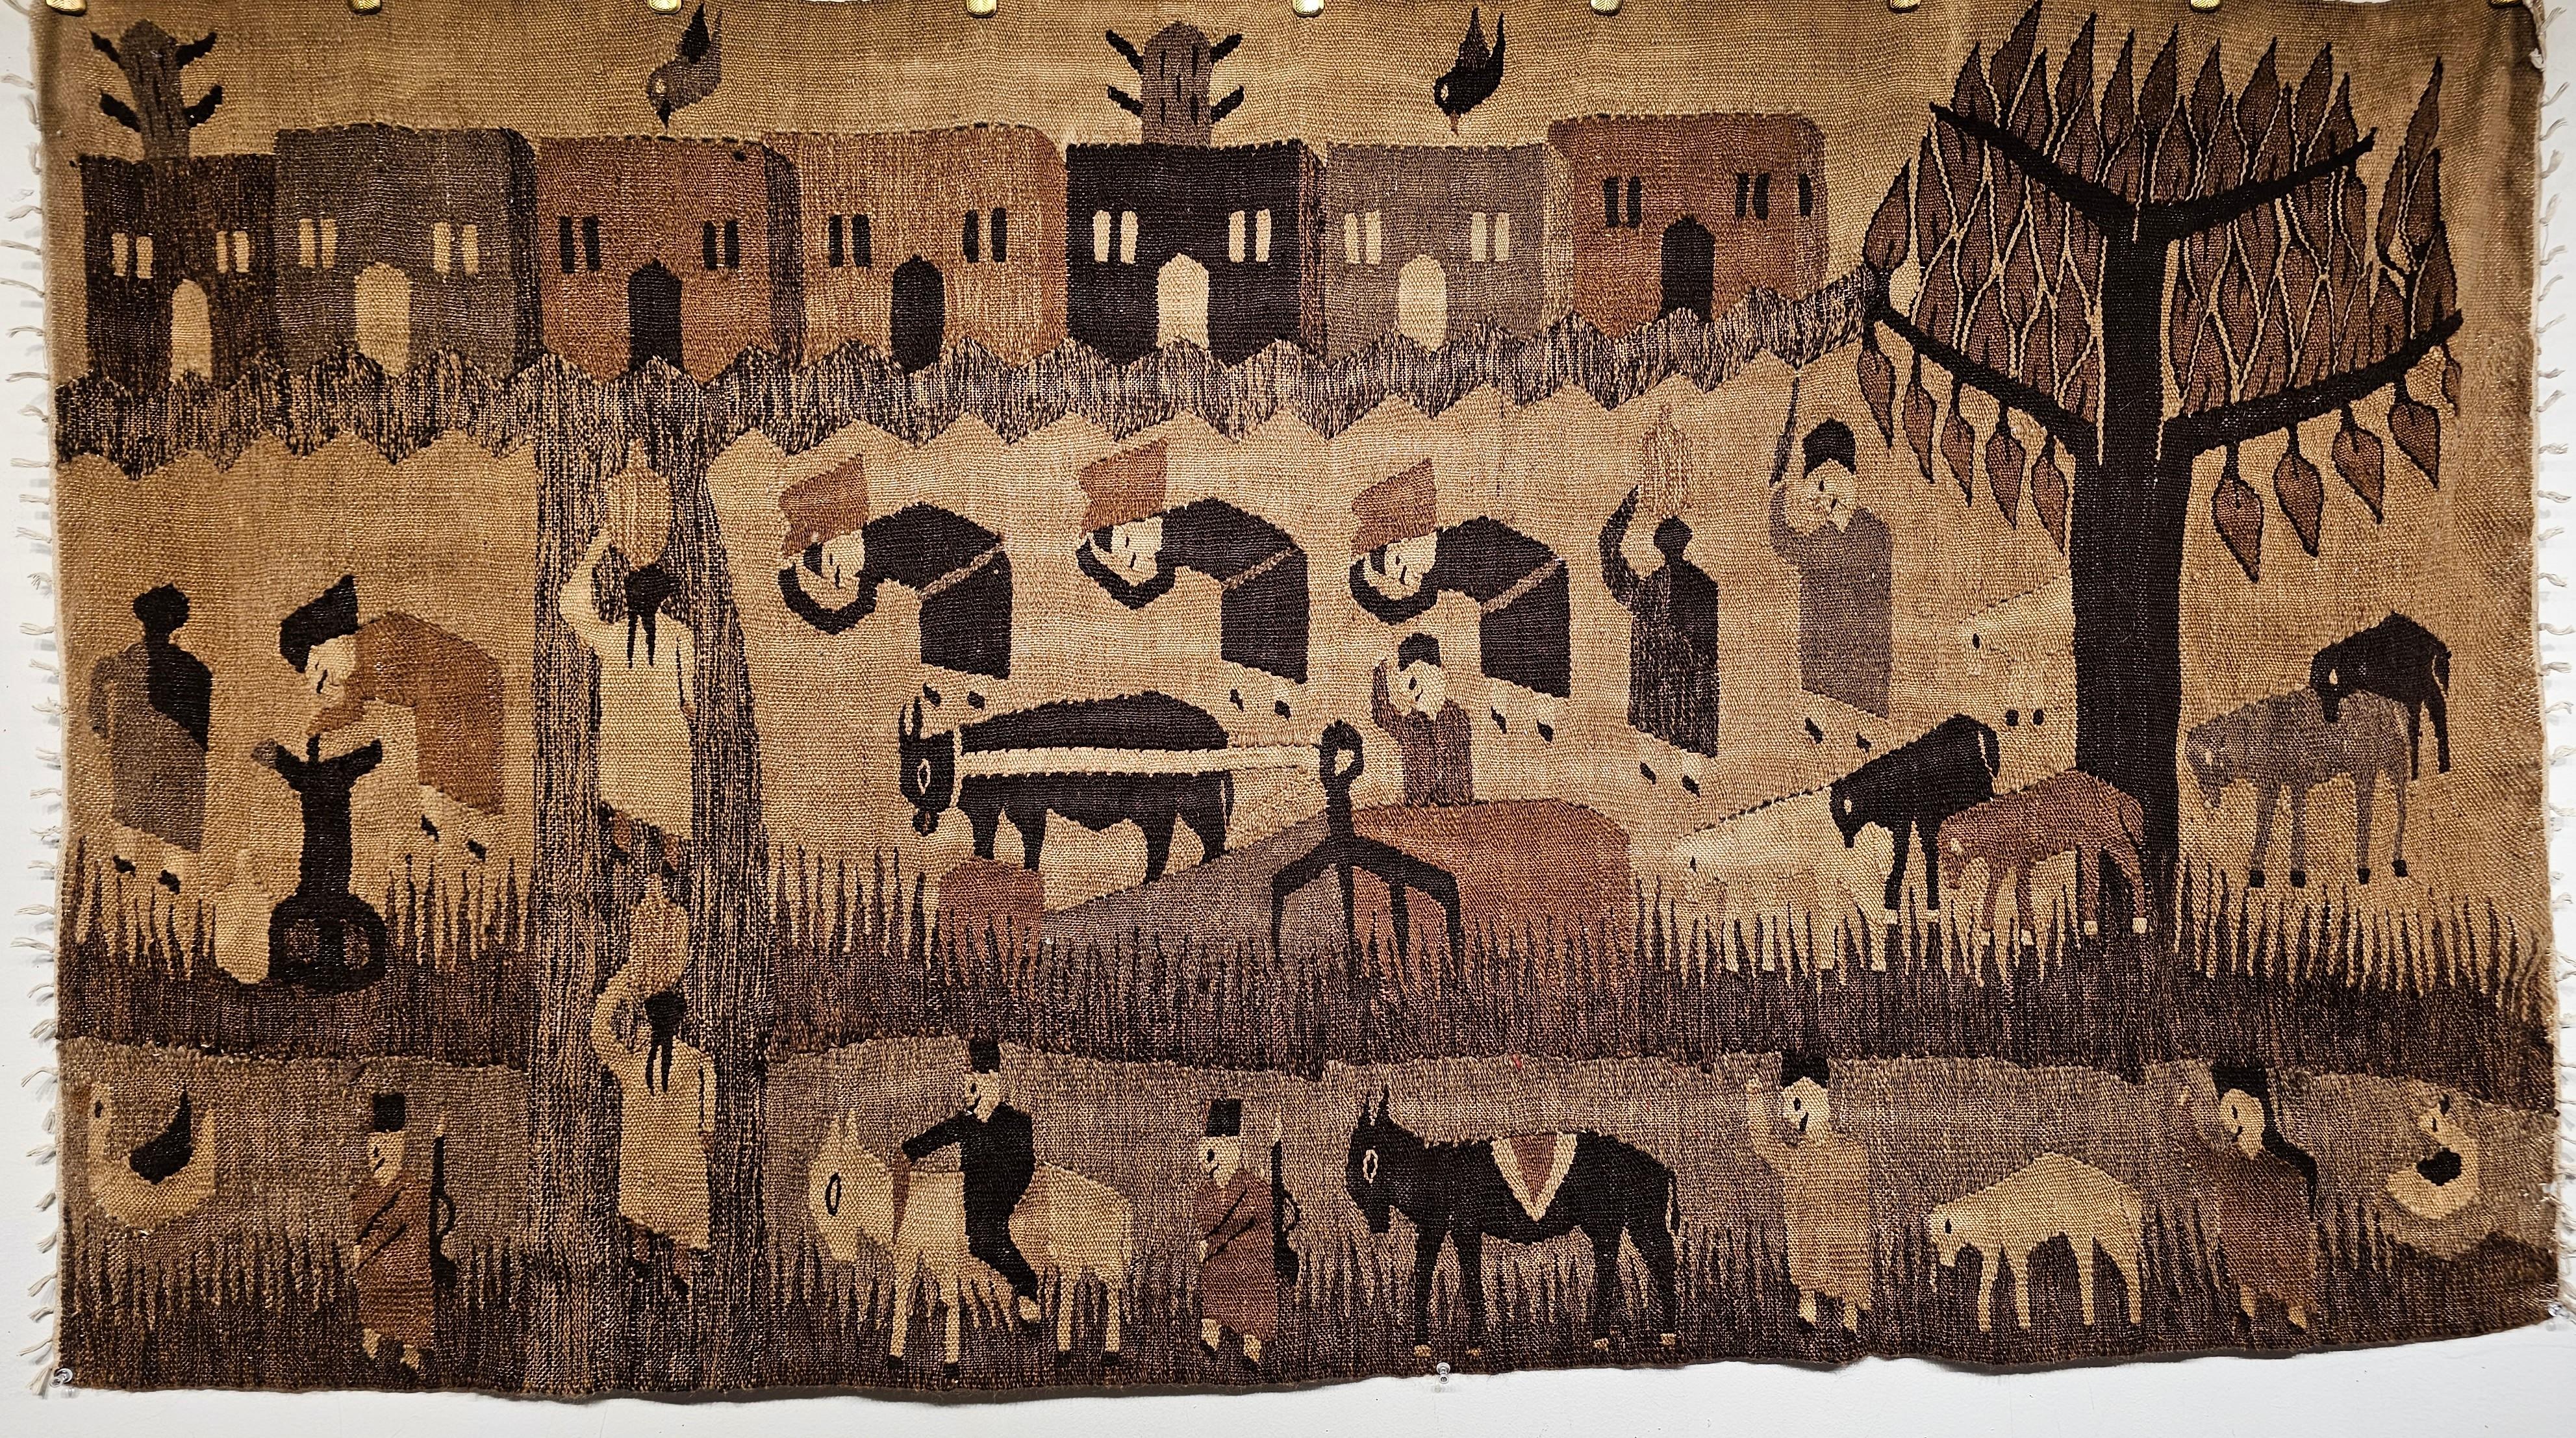 Vintage Hand Woven African Tapestry depicting various scenes of work around a farm with people and animals.  What is most striking and appealing in this “outsider” and primitive creation is the simple beauty.  It shows the different facets of daily